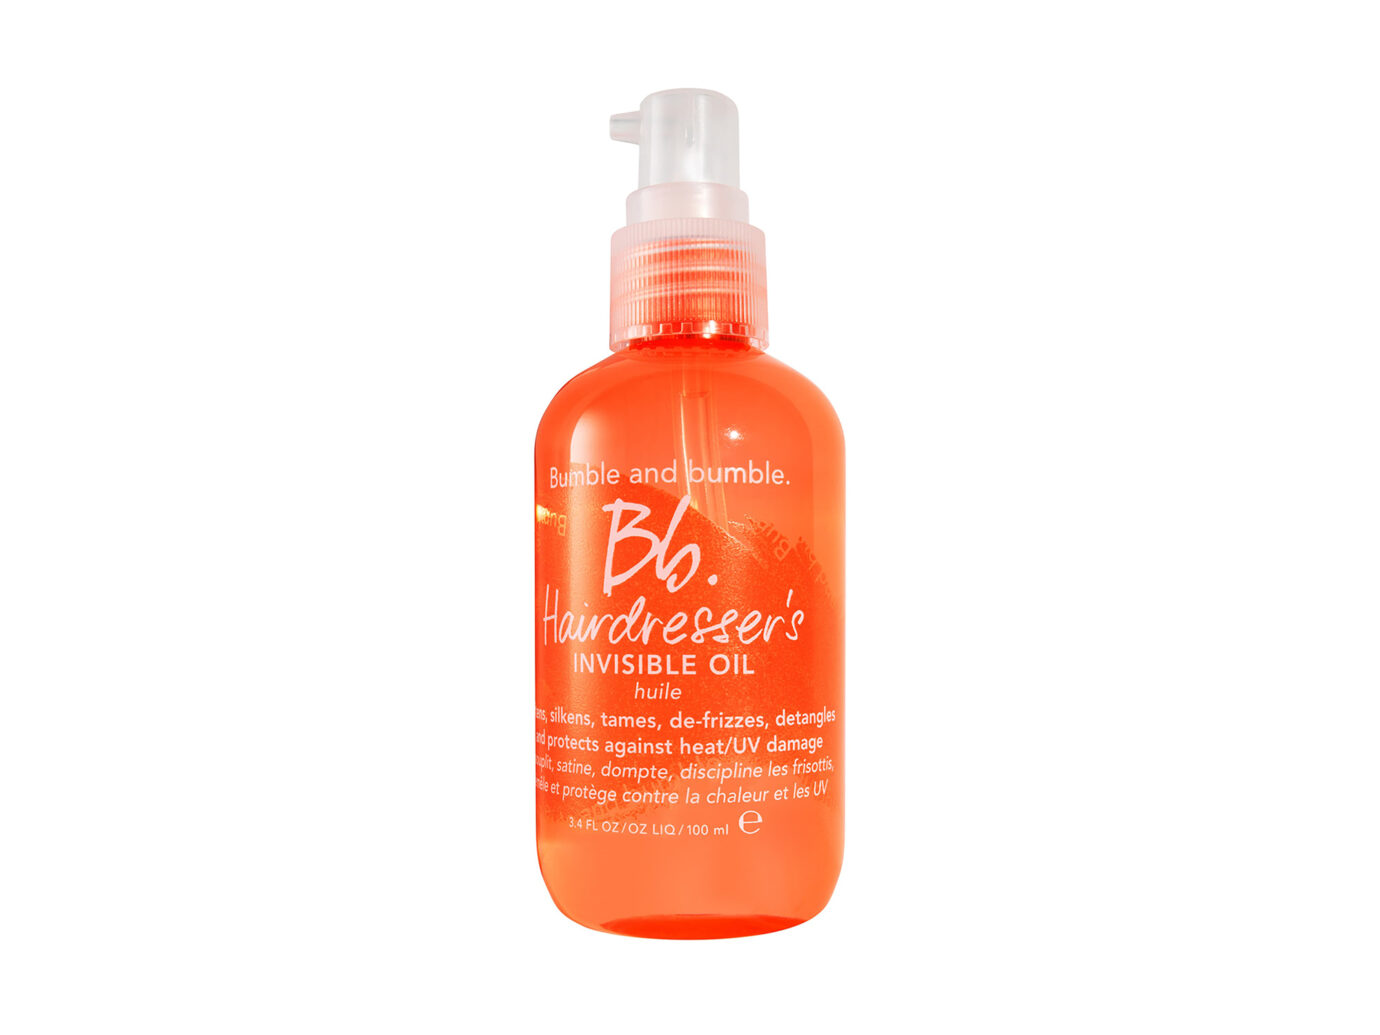 Bumble & Bumble Hairdresser’s Invisible Oil